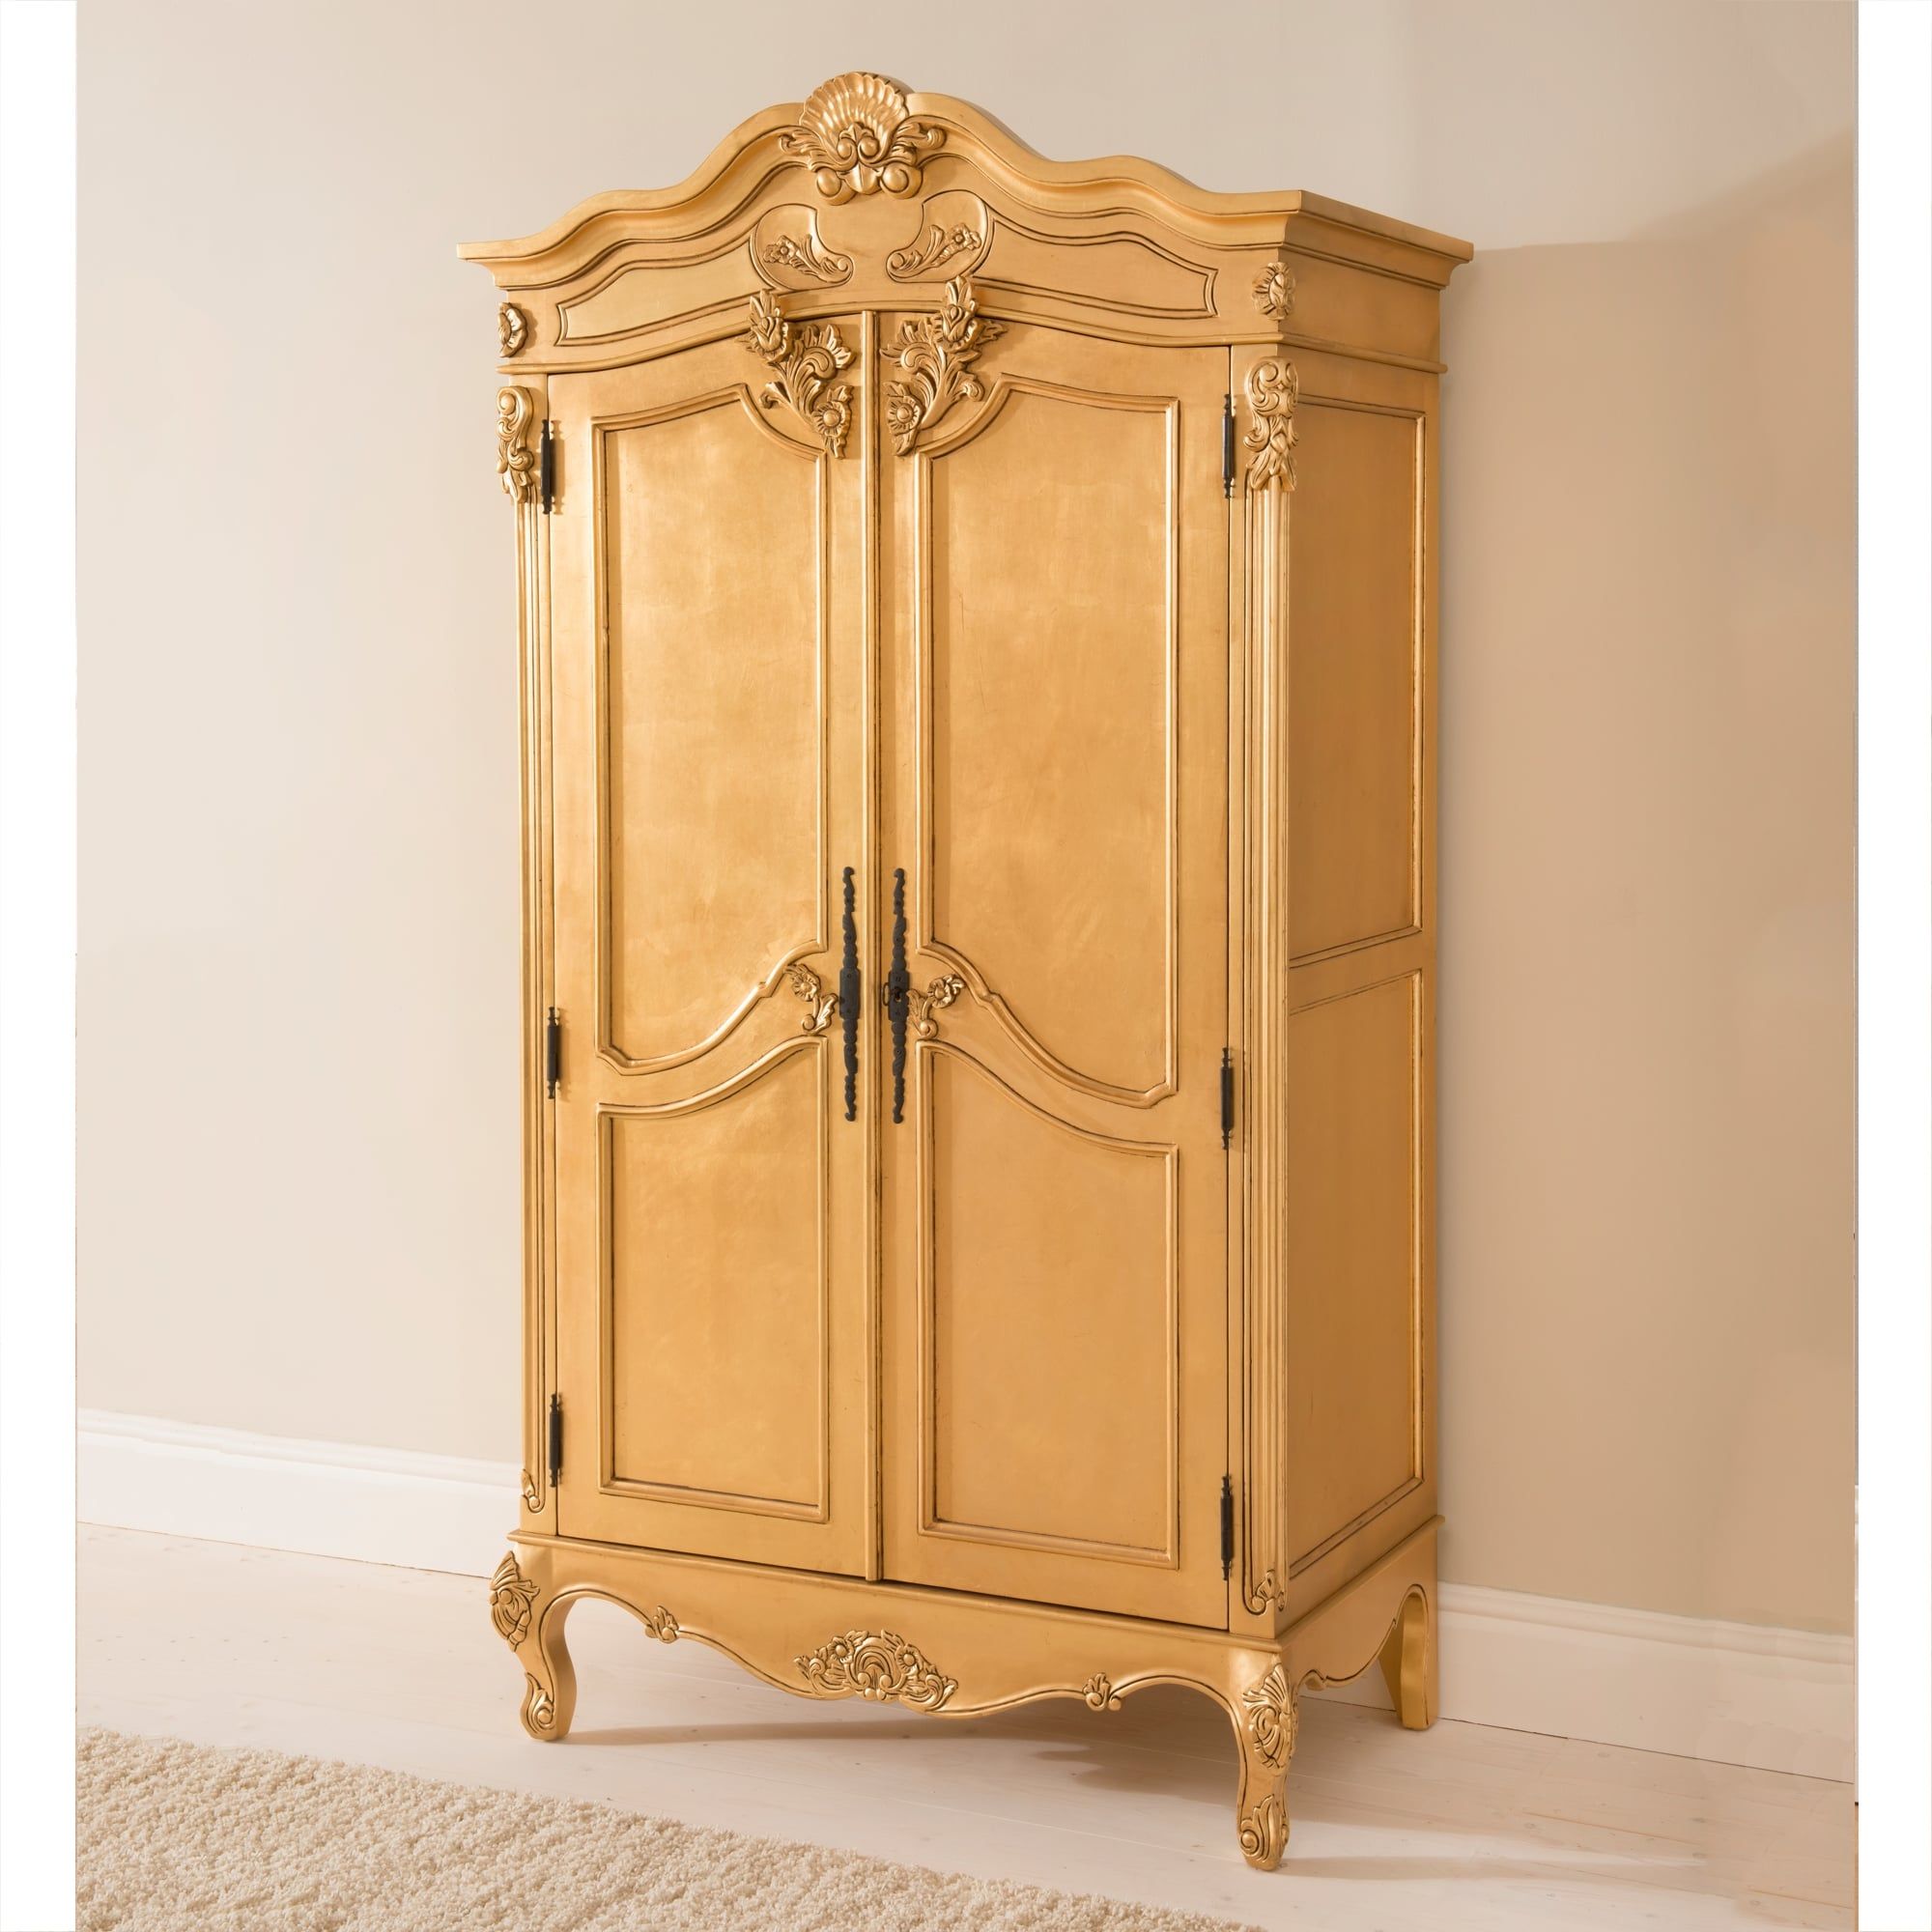 Baroque Antique French Wardrobe | Gold Leaf Furniture With Baroque Wardrobes (View 6 of 15)